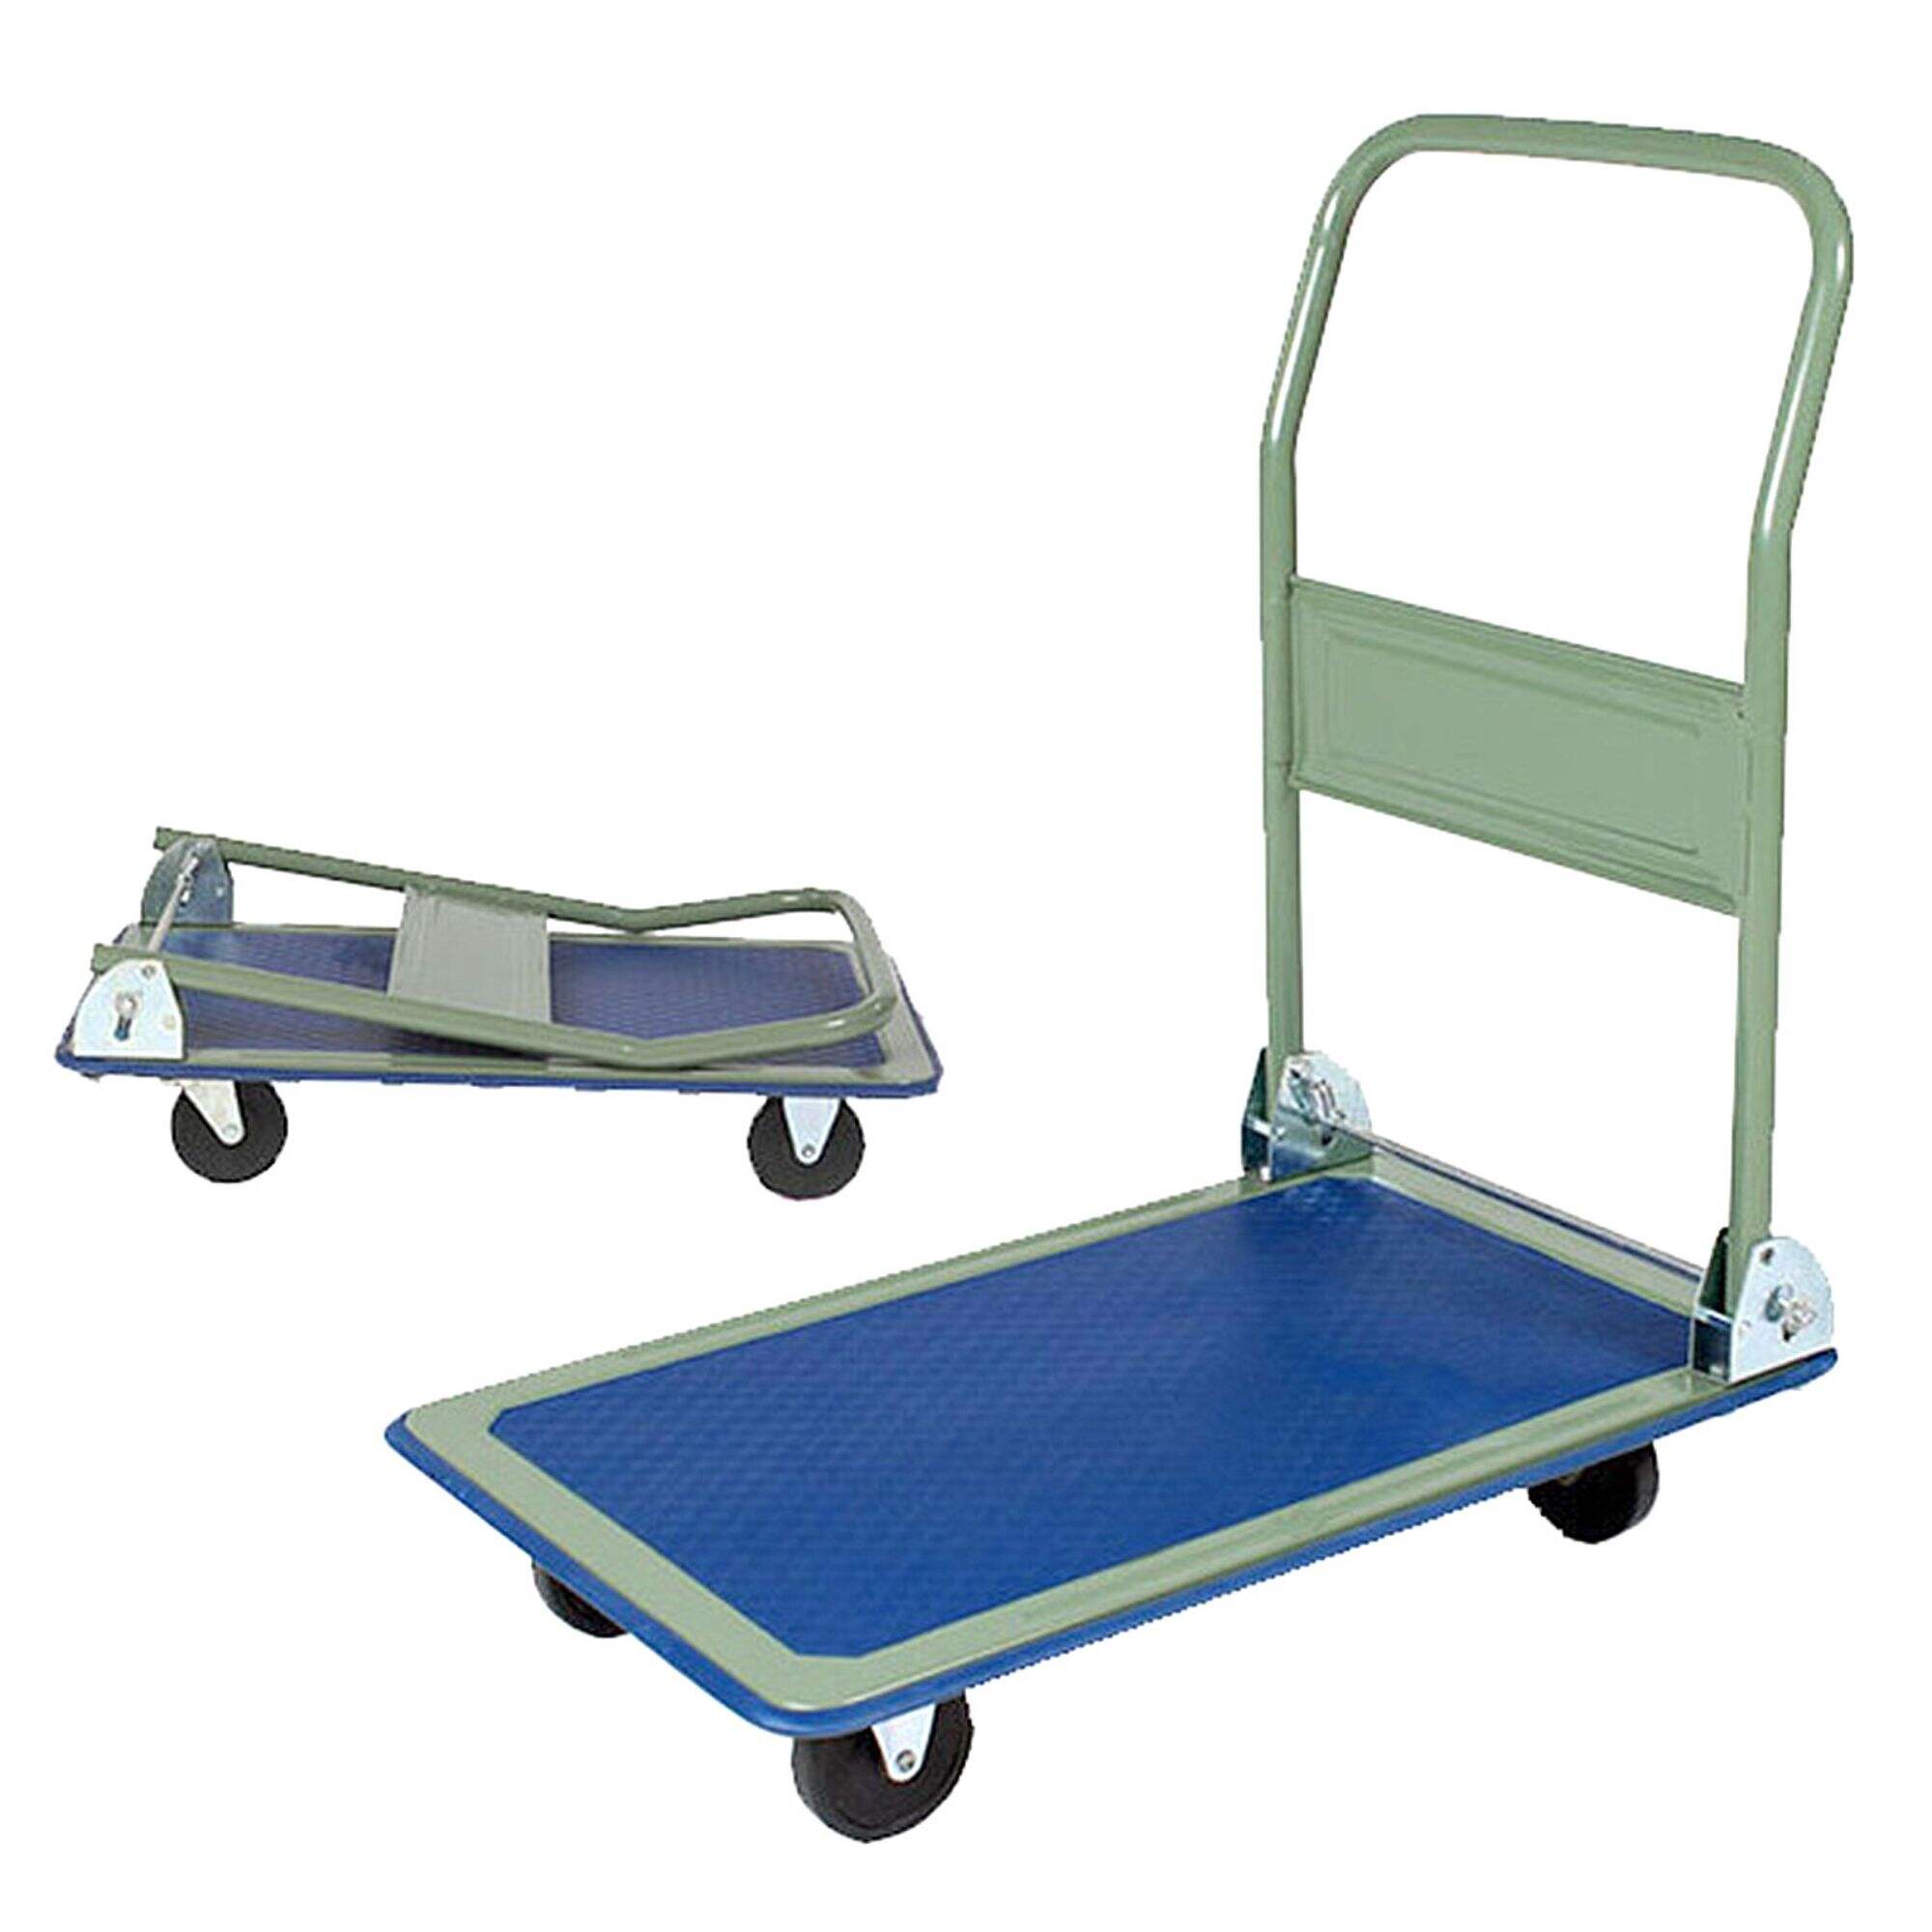 PH150 Platform Hand Truck, Folding Push Hand Dolly Cart for Loading and Storage, with 4